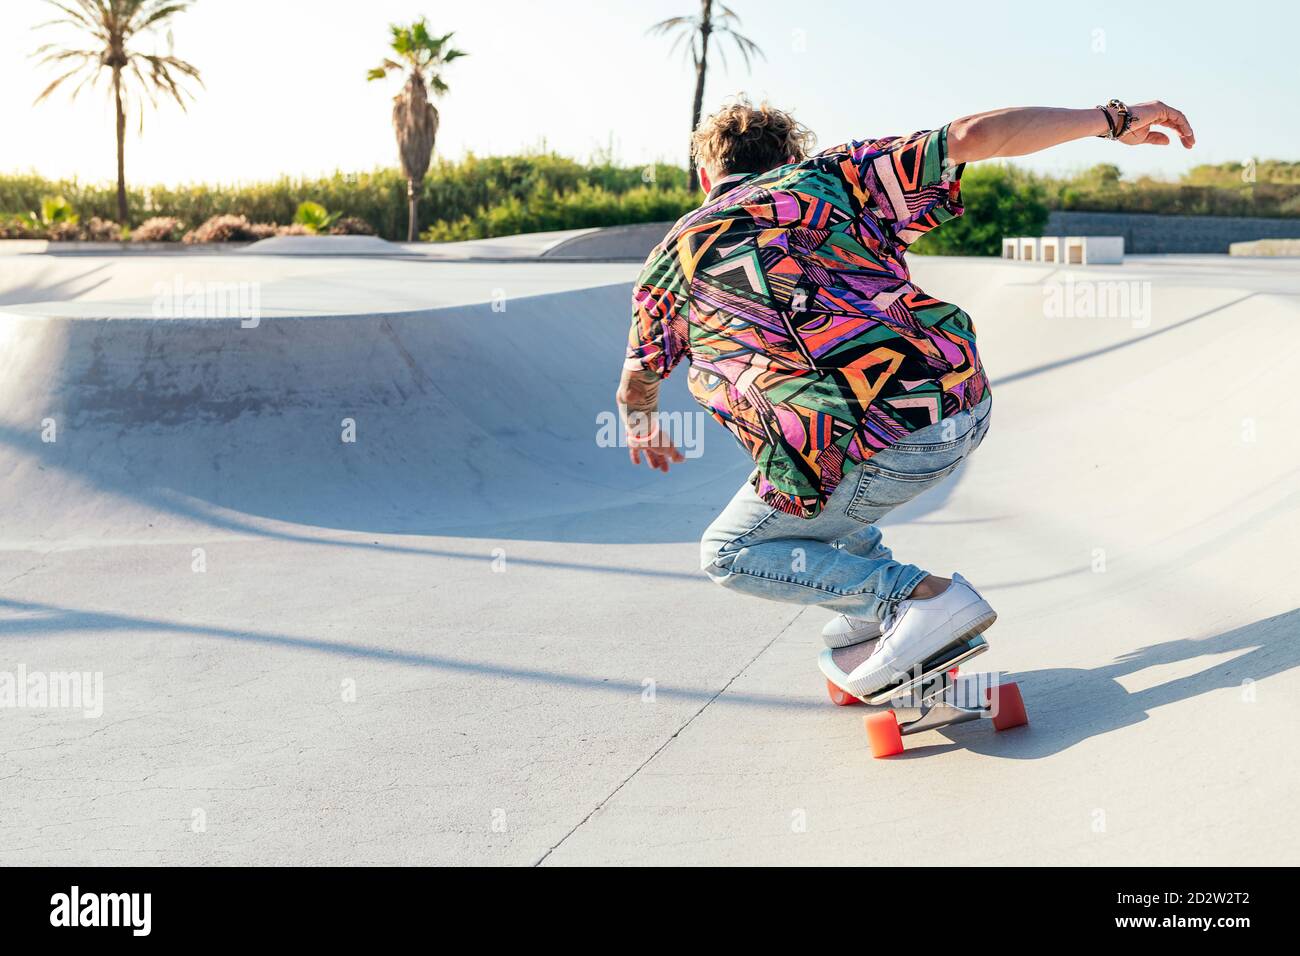 Back view of anonymous funky young male skateboarder in trendy colorful shirt and jeans performing trick on concrete ramp while practicing skills in skatepark Stock Photo